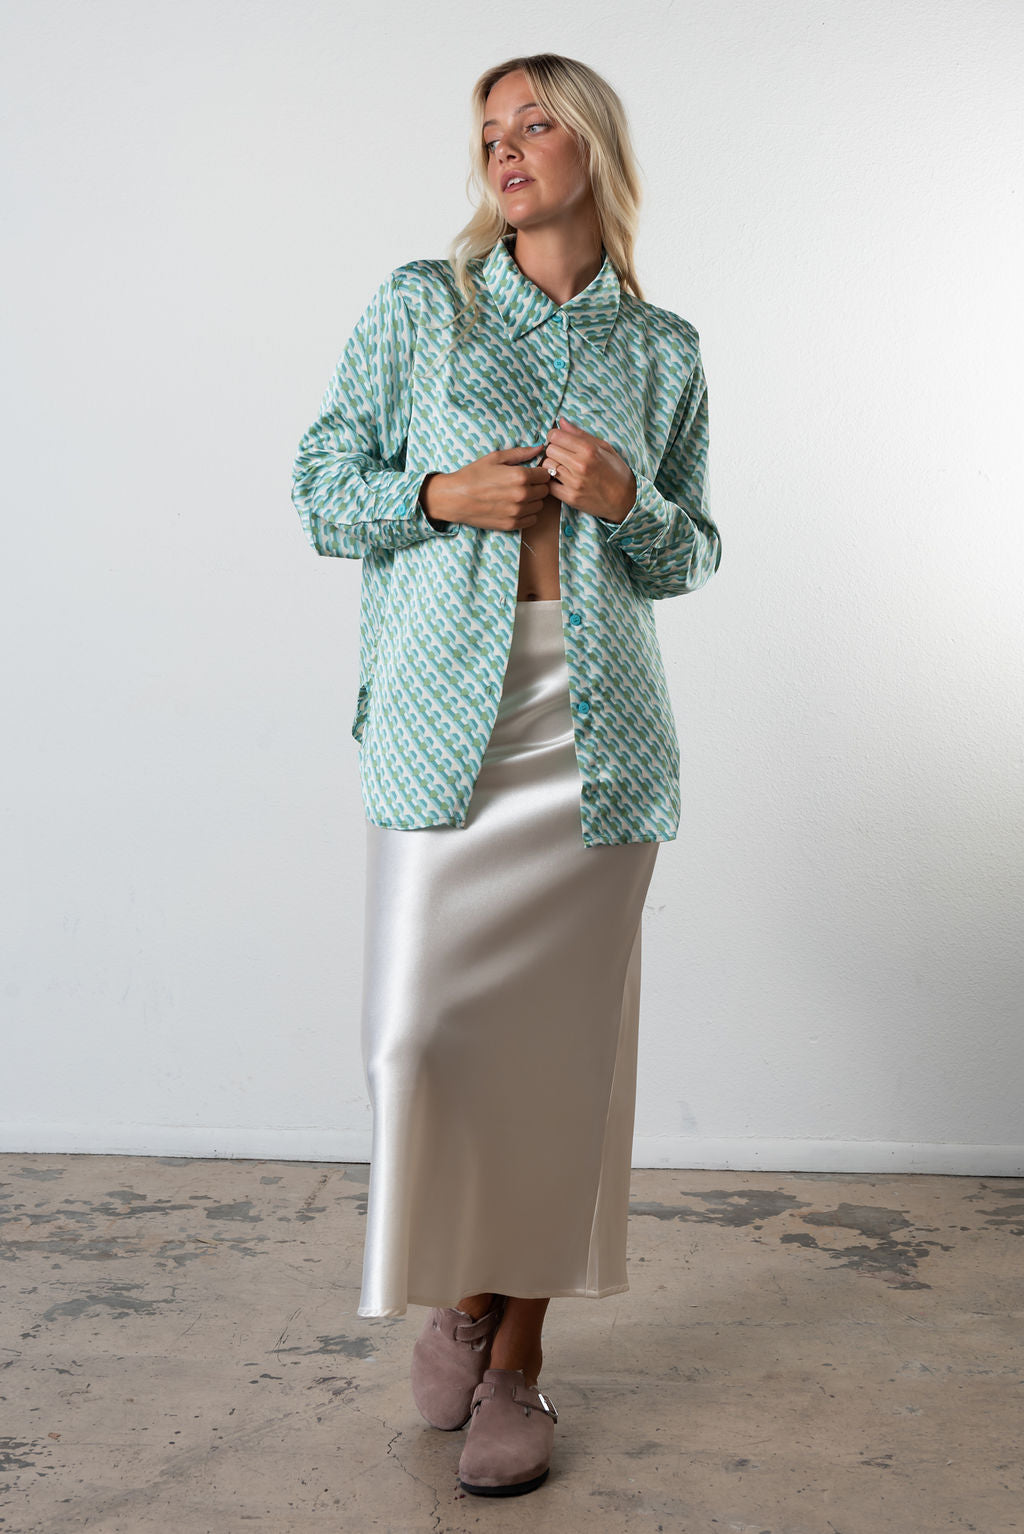 Between The Lines Satin Button Down Top In Aqua/Multi